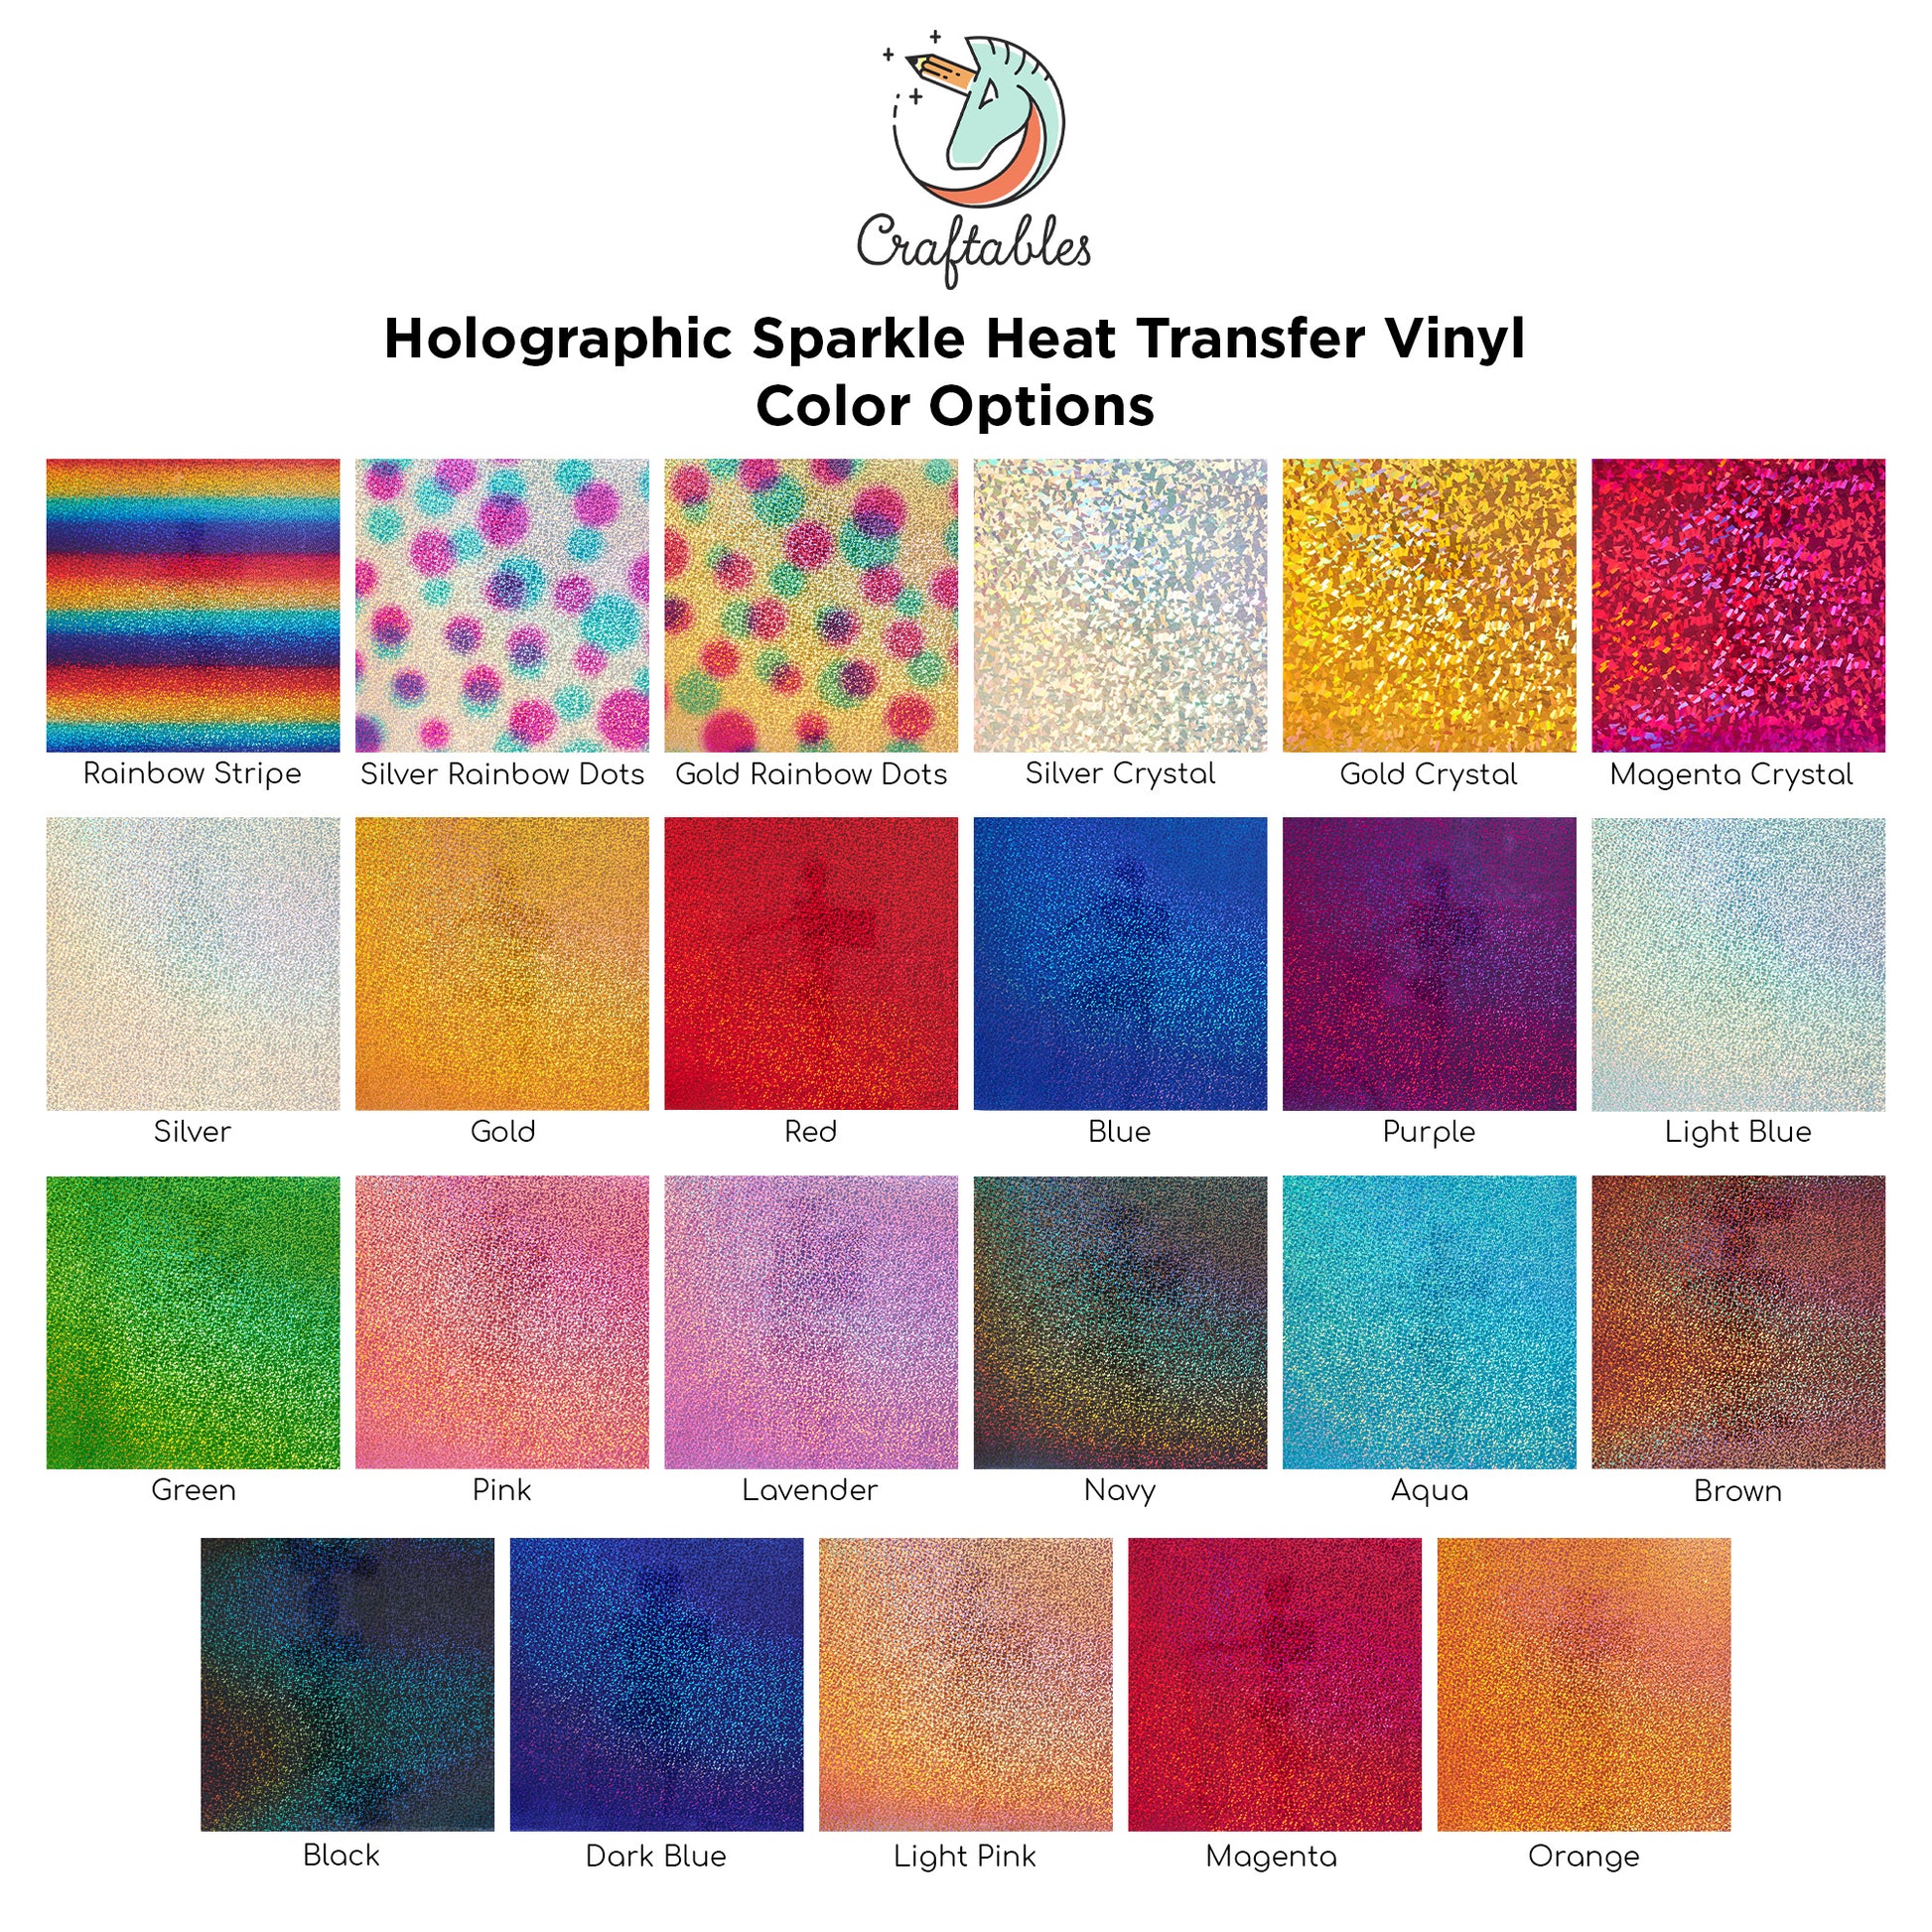 Red Holographic Sparkle Heat Transfer Vinyl Sheets By Craftables –  shopcraftables